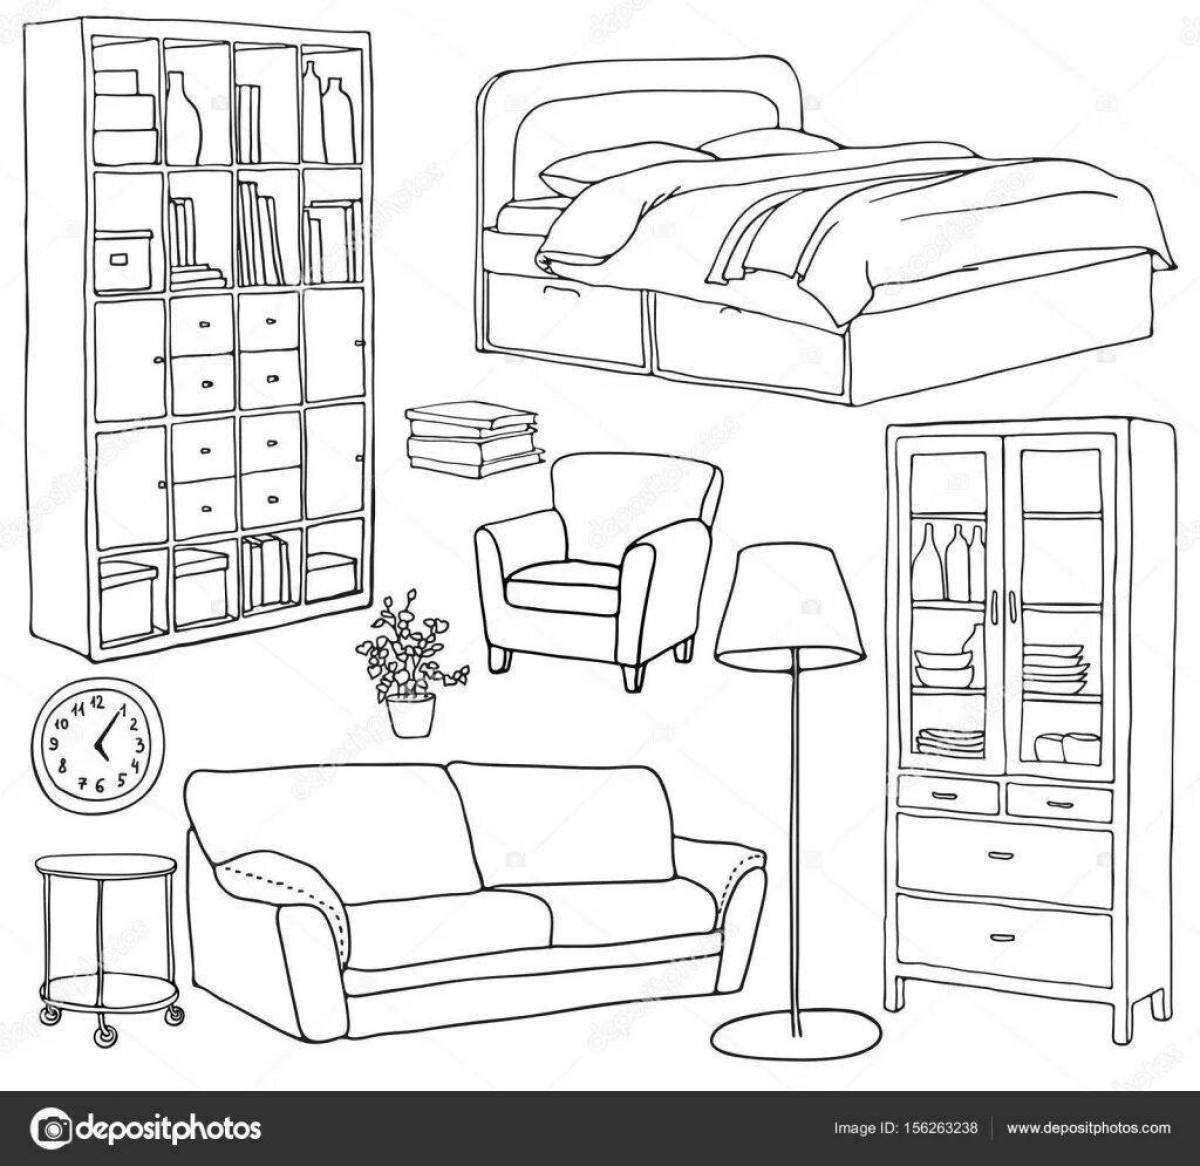 Fun current side interior coloring page